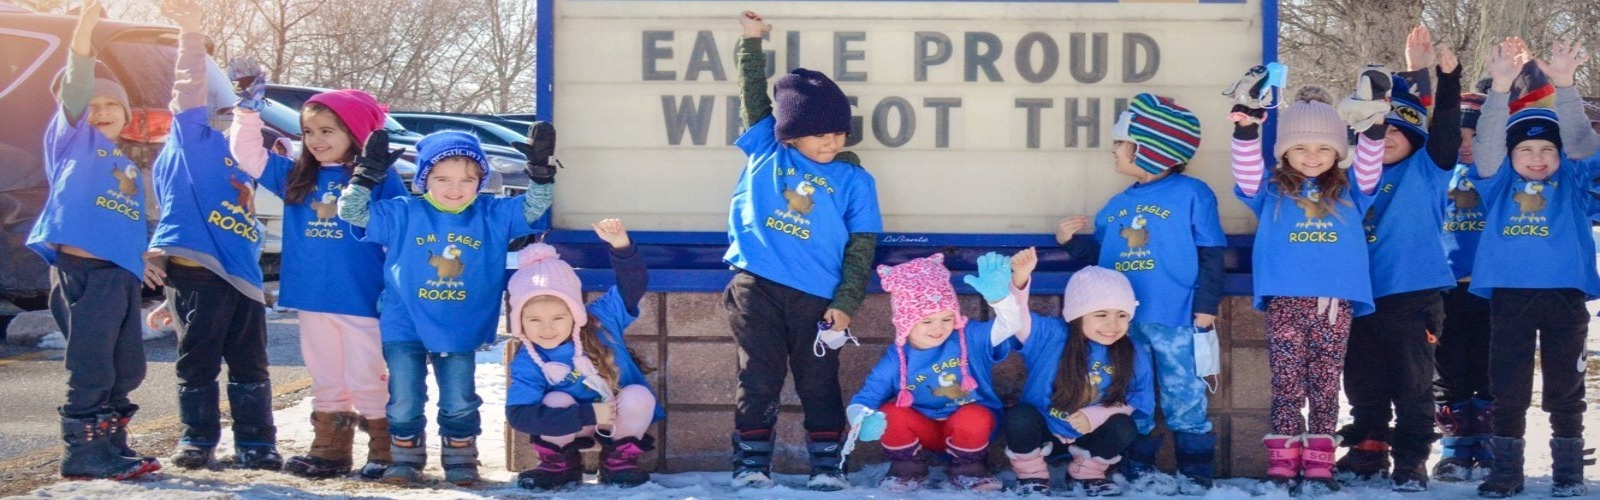 Kids standing in front of a DM Eagle sign